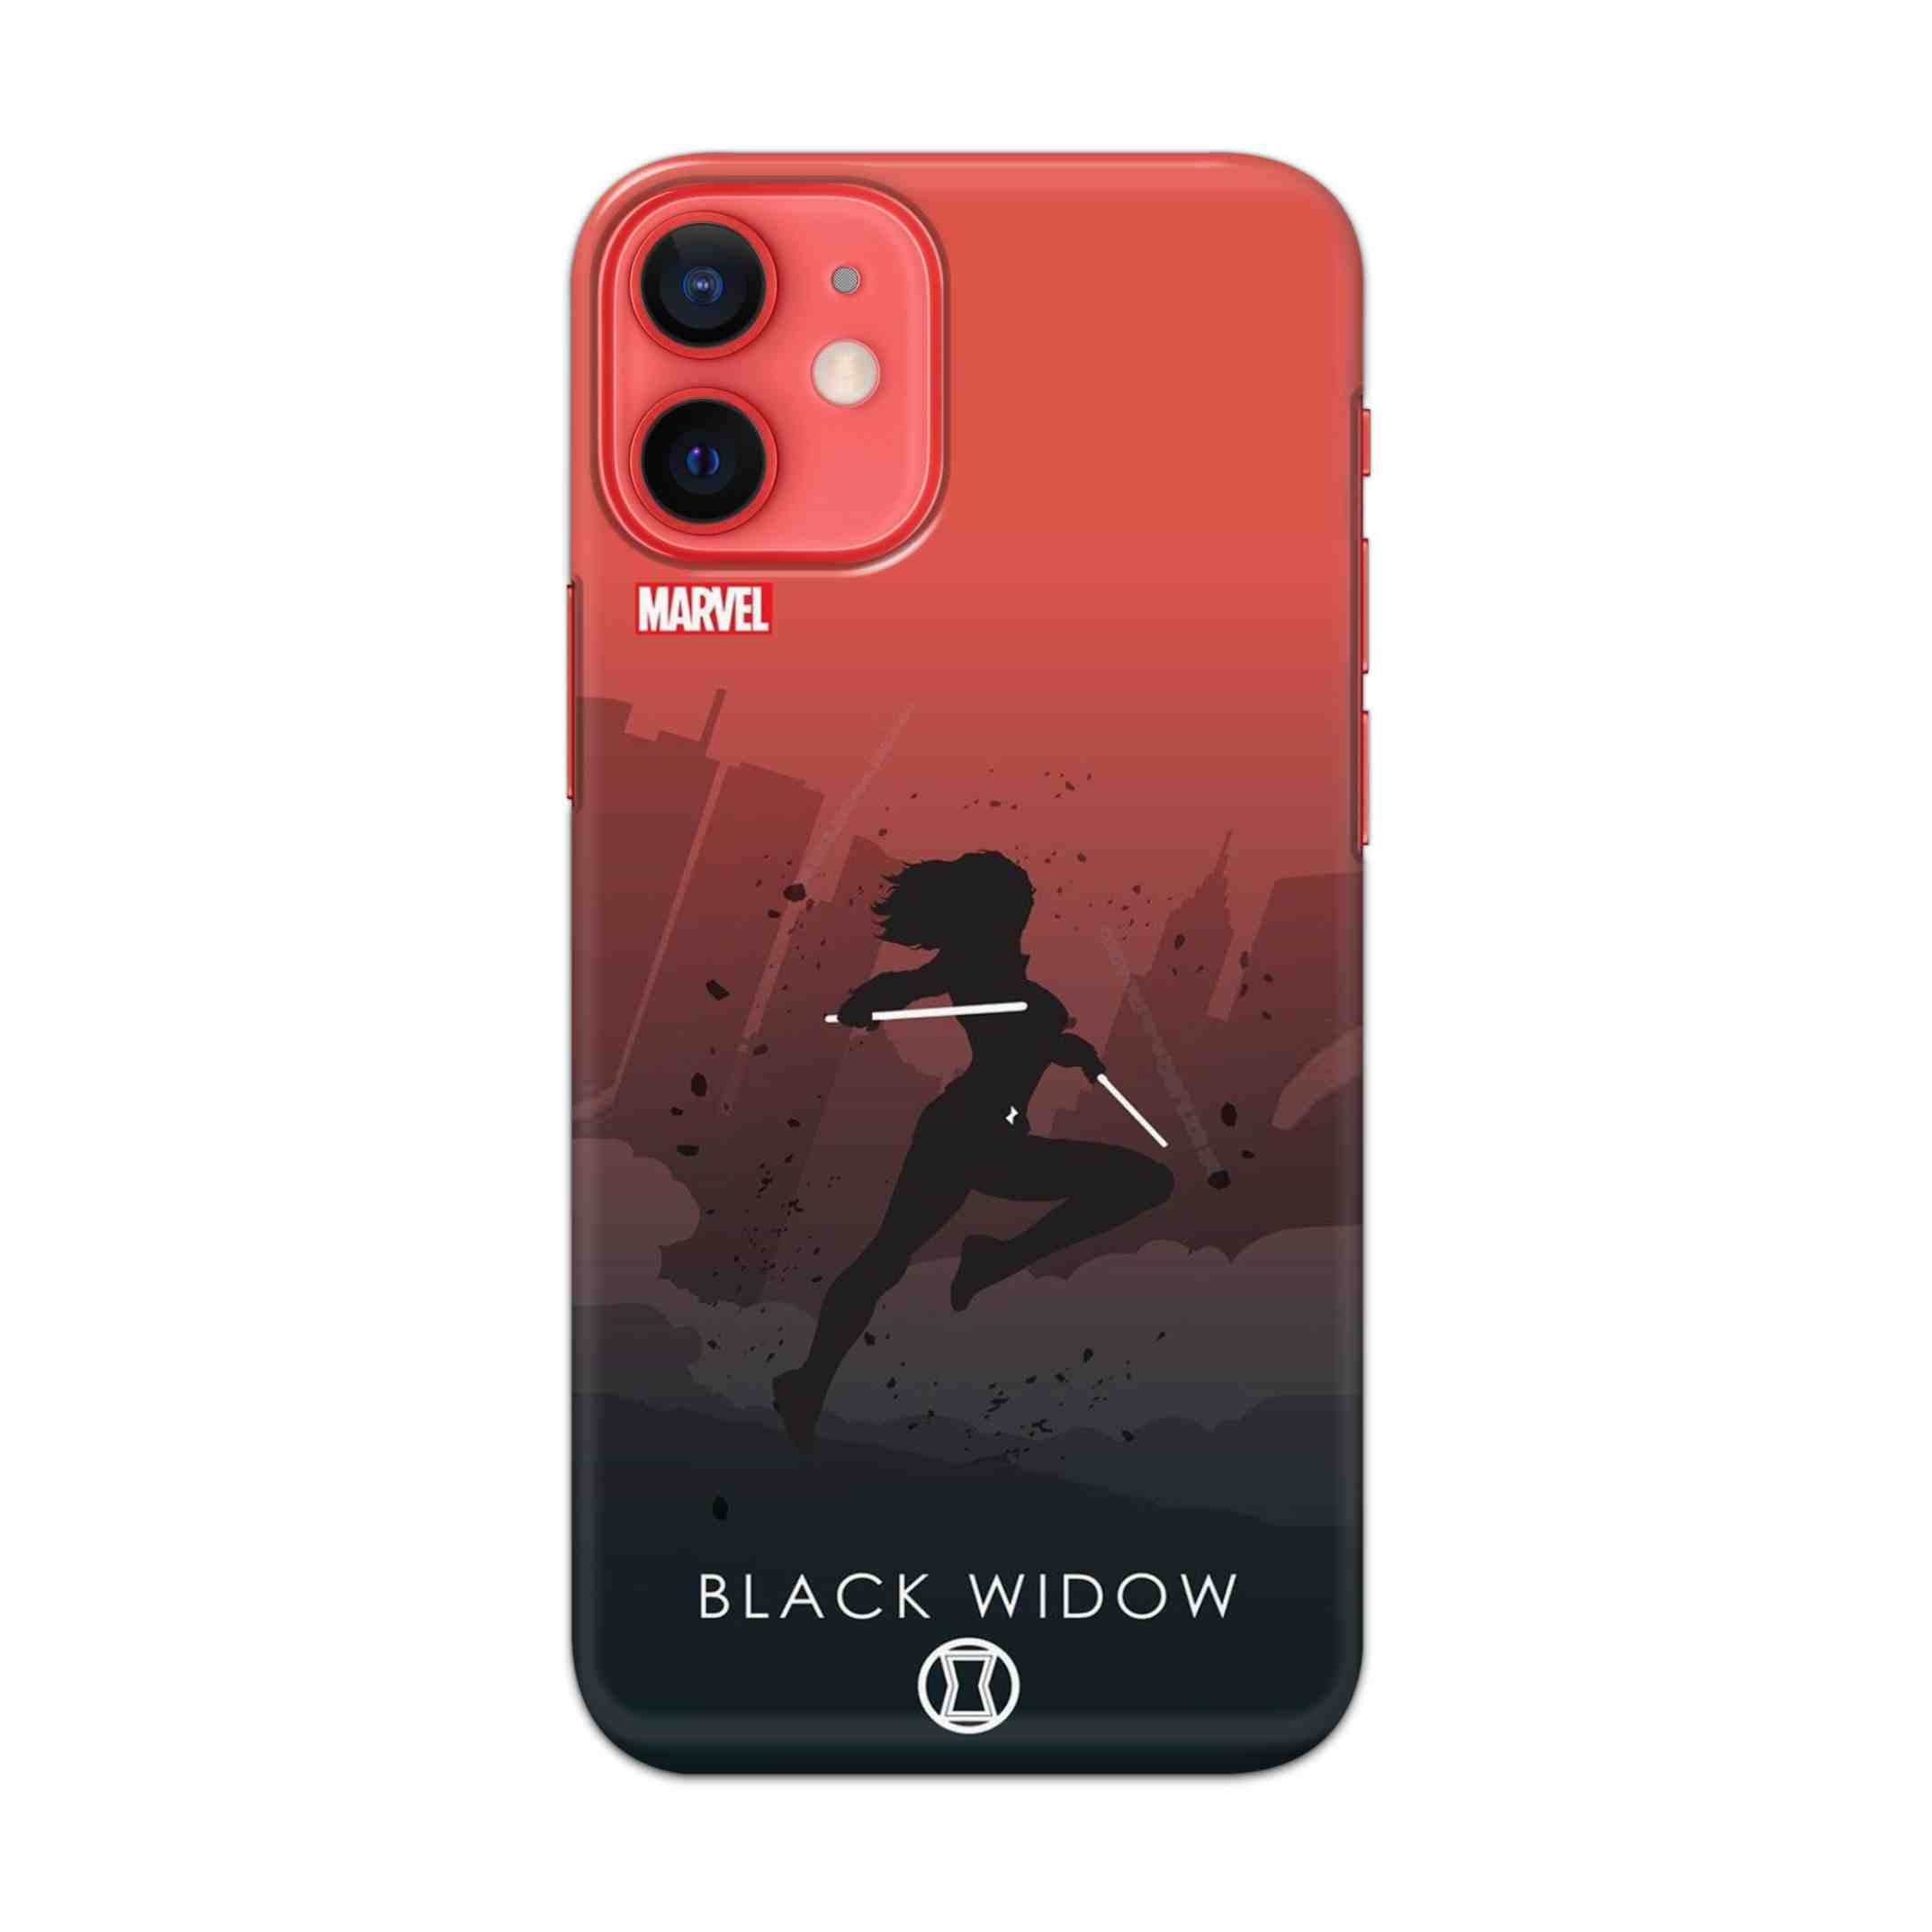 Buy Black Widow Hard Back Mobile Phone Case/Cover For Apple iPhone 12 mini Online